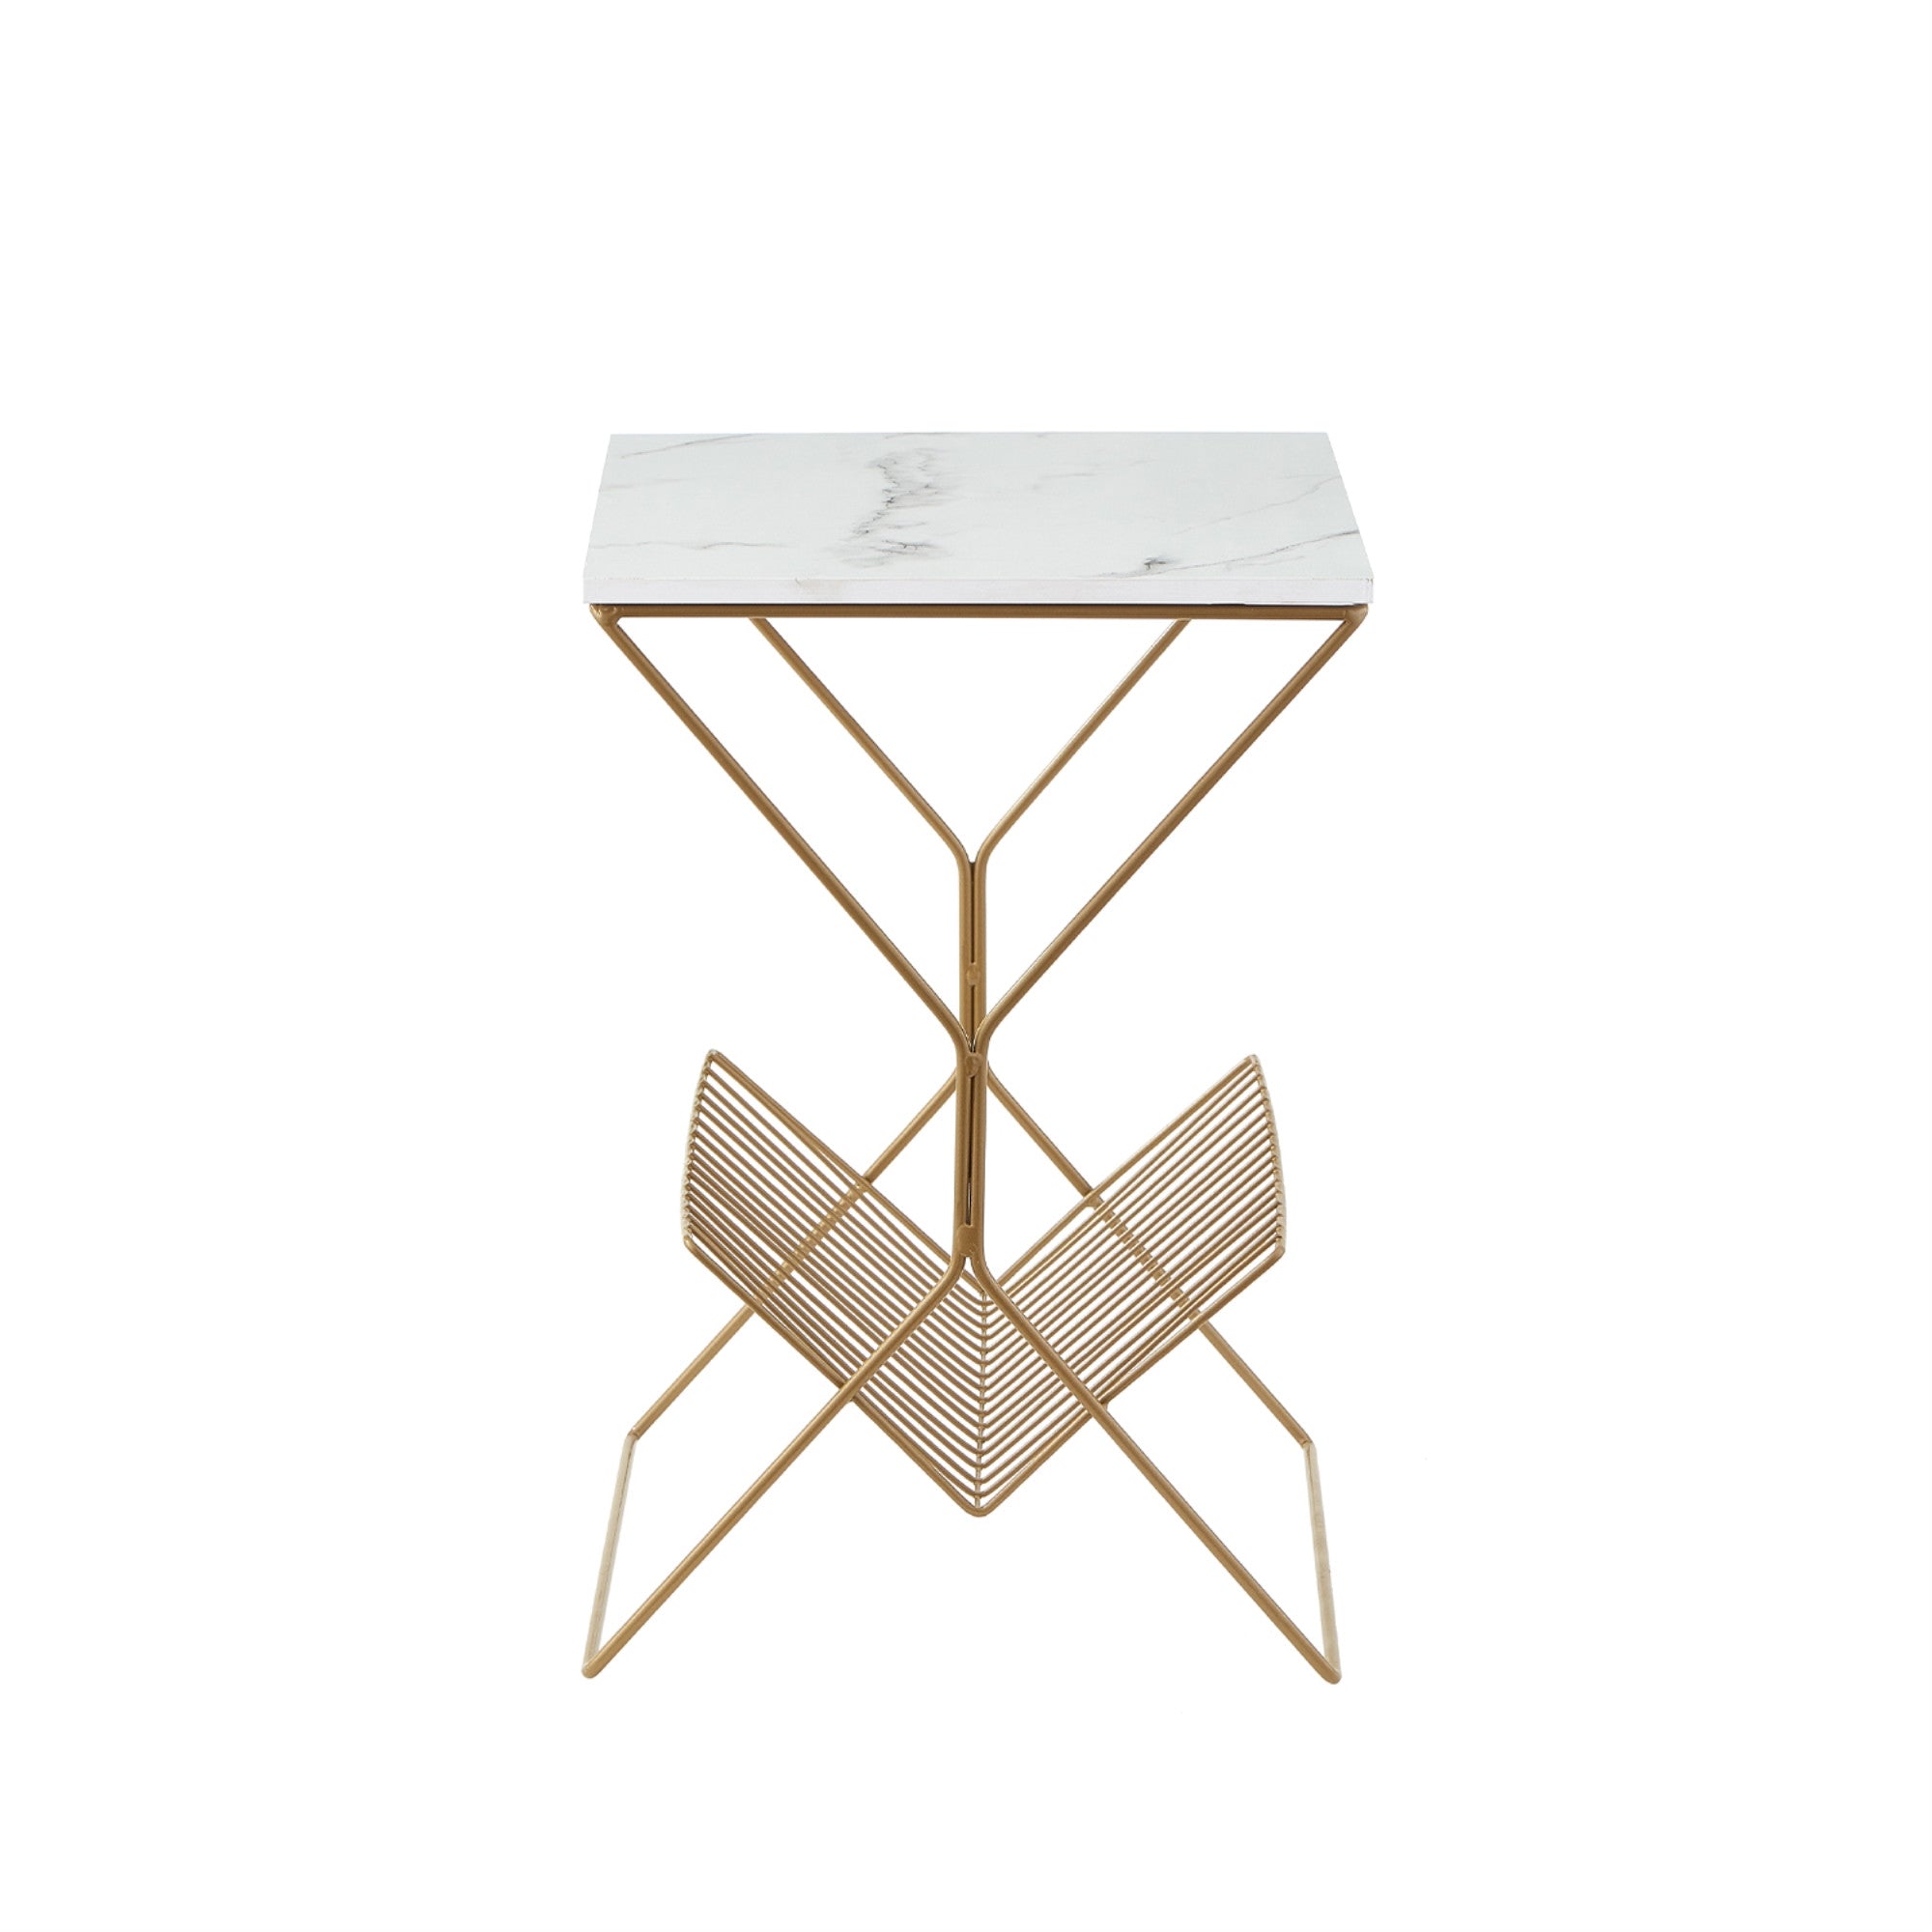 22" Gold and White Veneer End Table